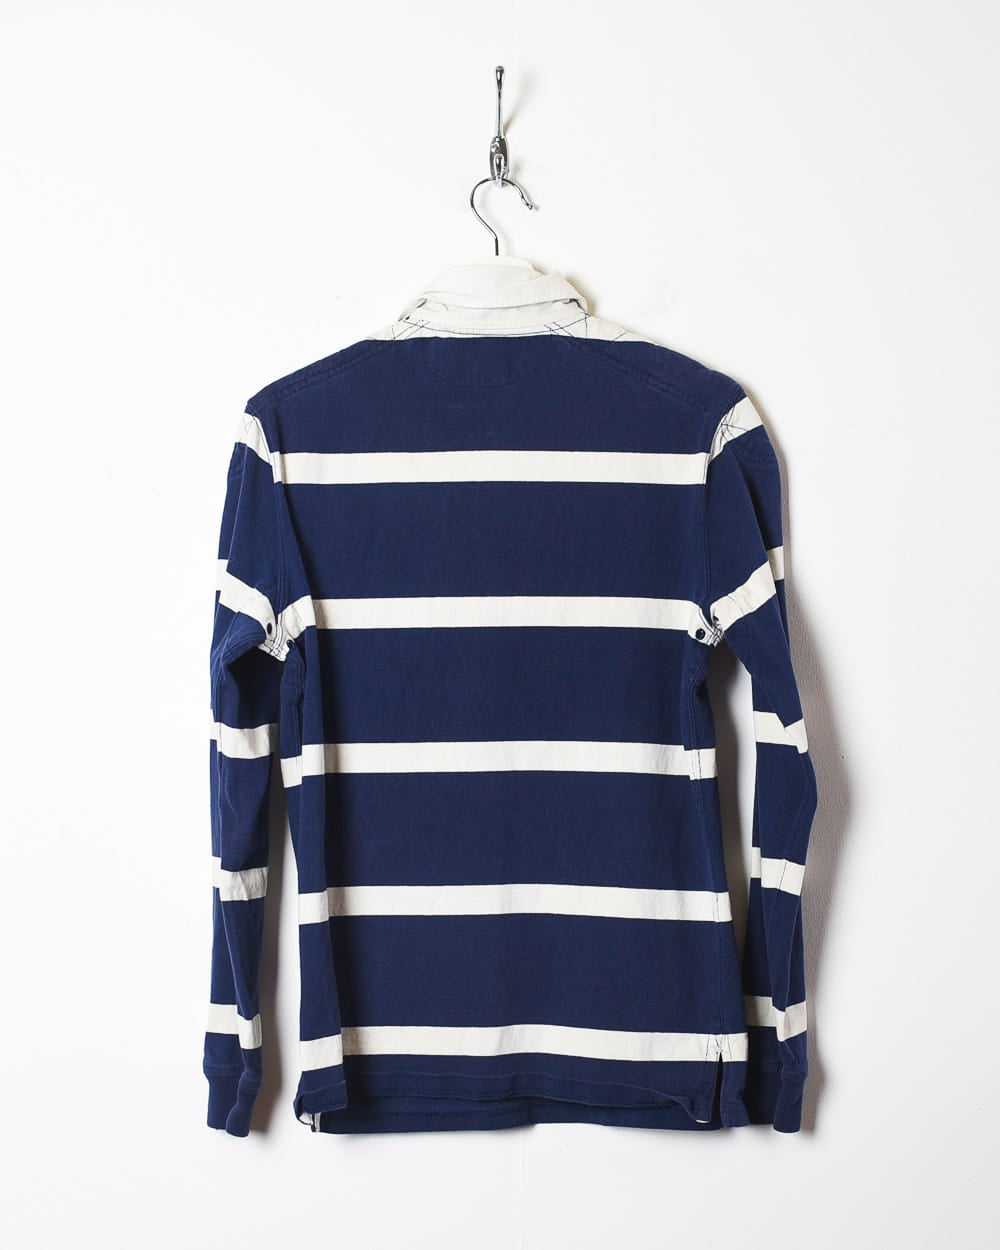 Navy Polo Ralph Lauren Striped Rugby Shirt - Small